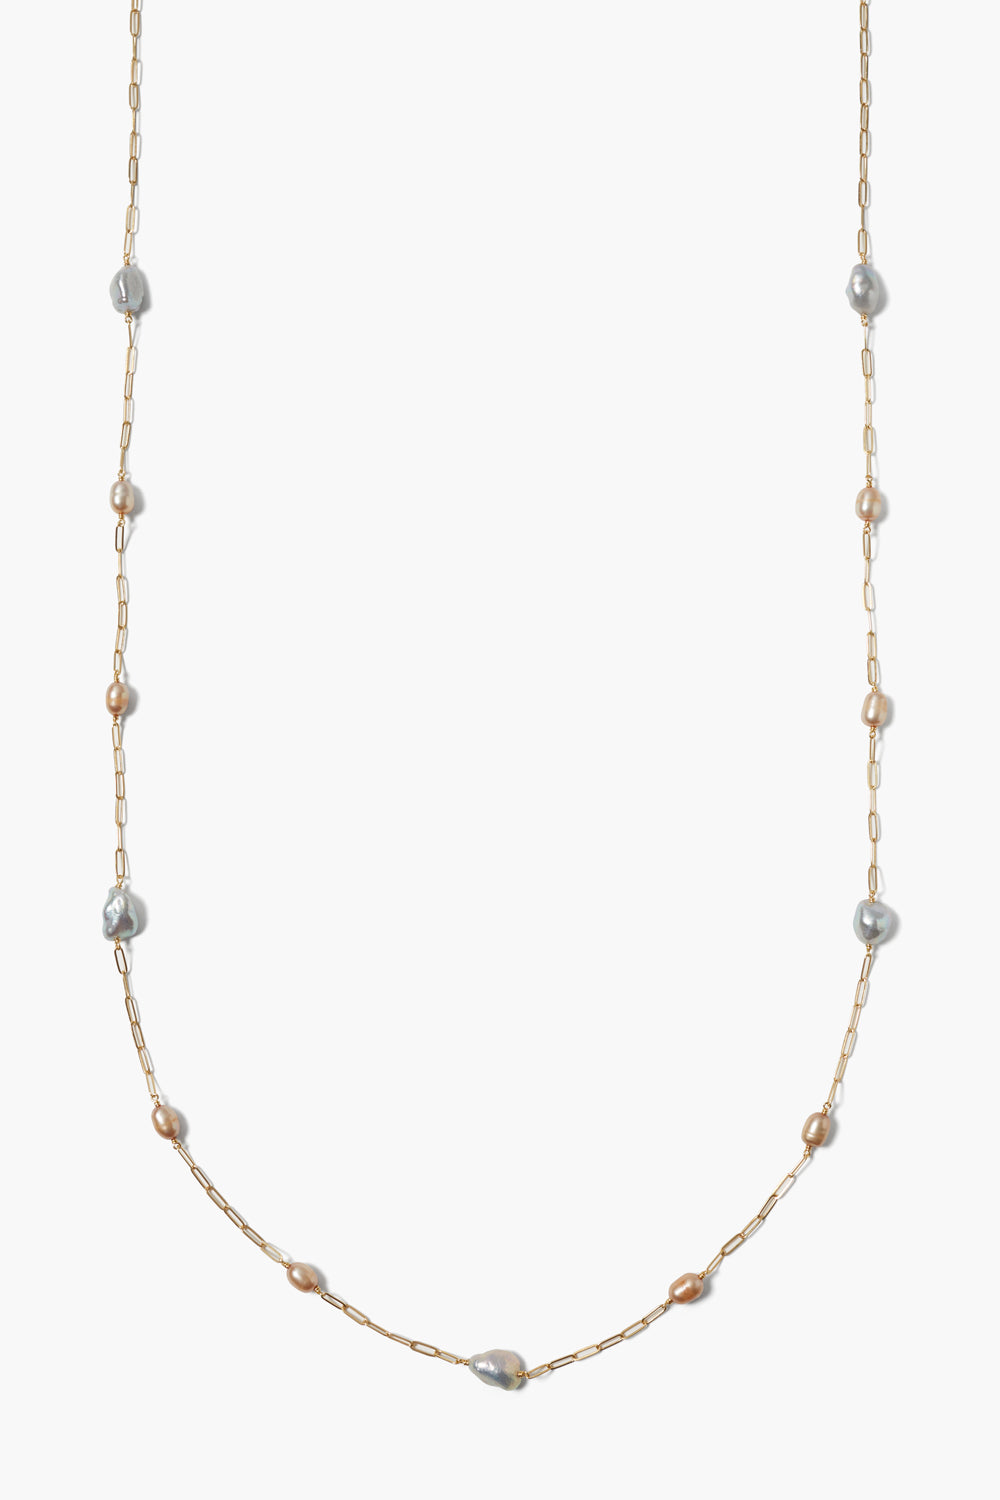 18K GOLD PLATED NECKLACE-CHAMPAGNE PEARL MIX - Kingfisher Road - Online Boutique